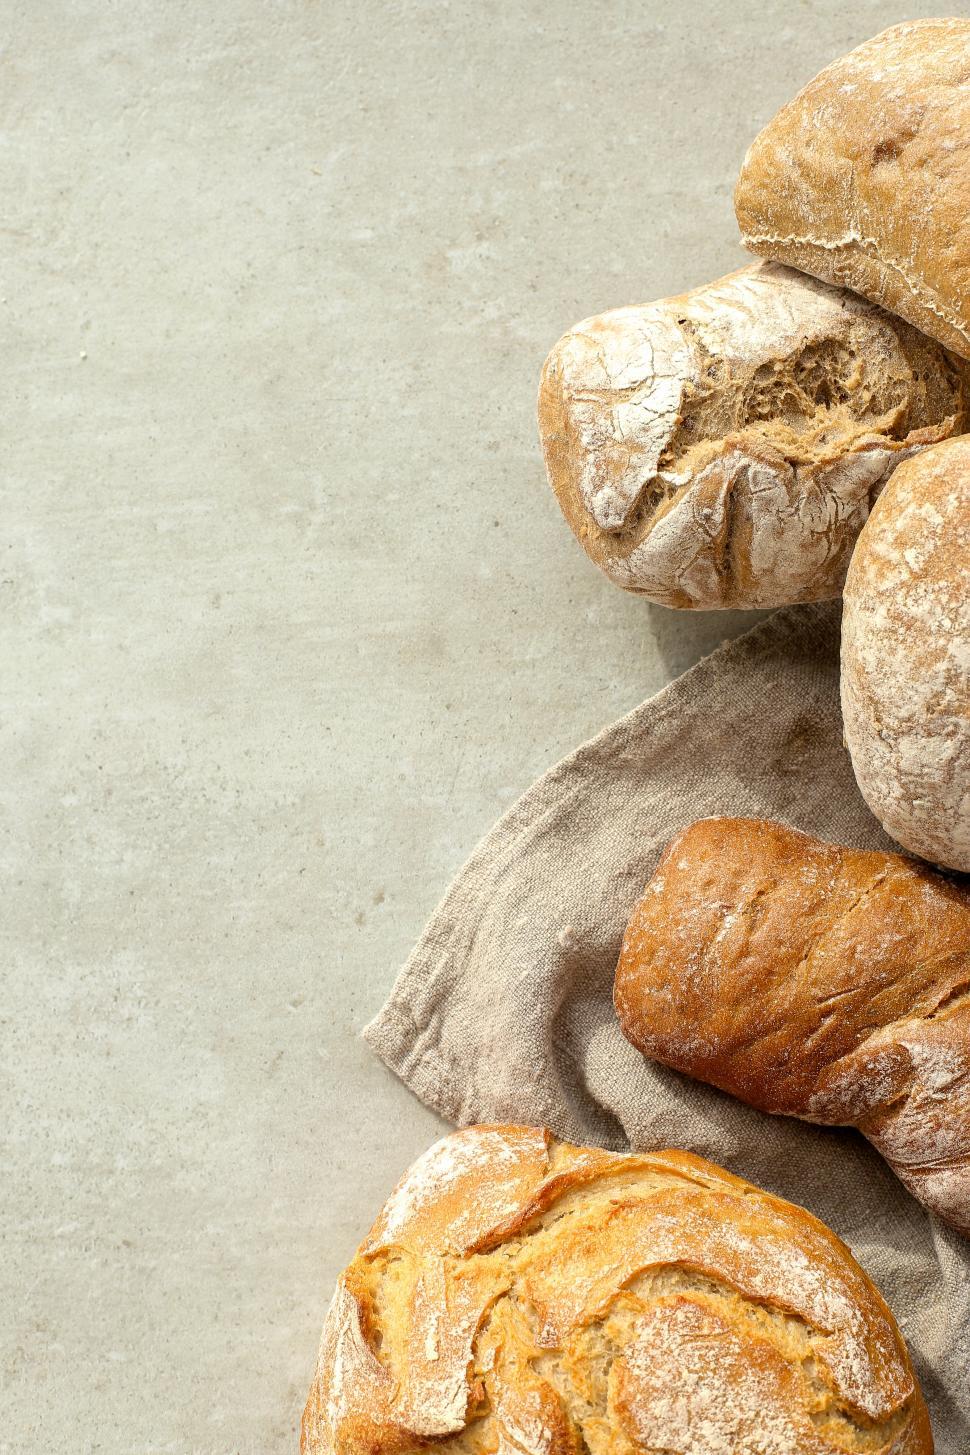 Free Image of Breads in a stack at the edge of a frame 